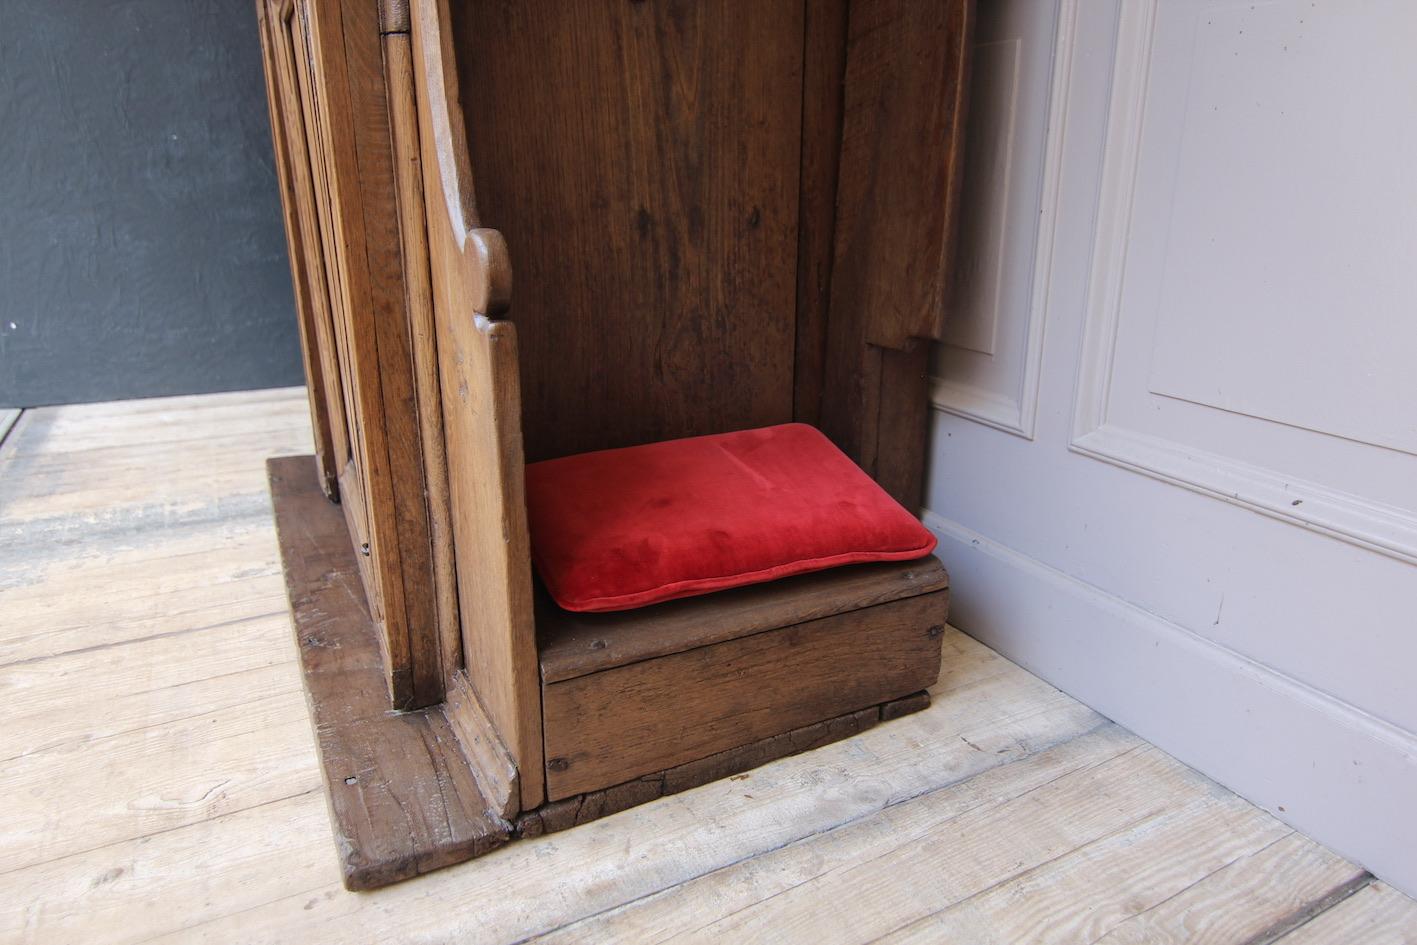 Italian 17th Century Tuscan Renaissance Style Confessional Made of Oak For Sale